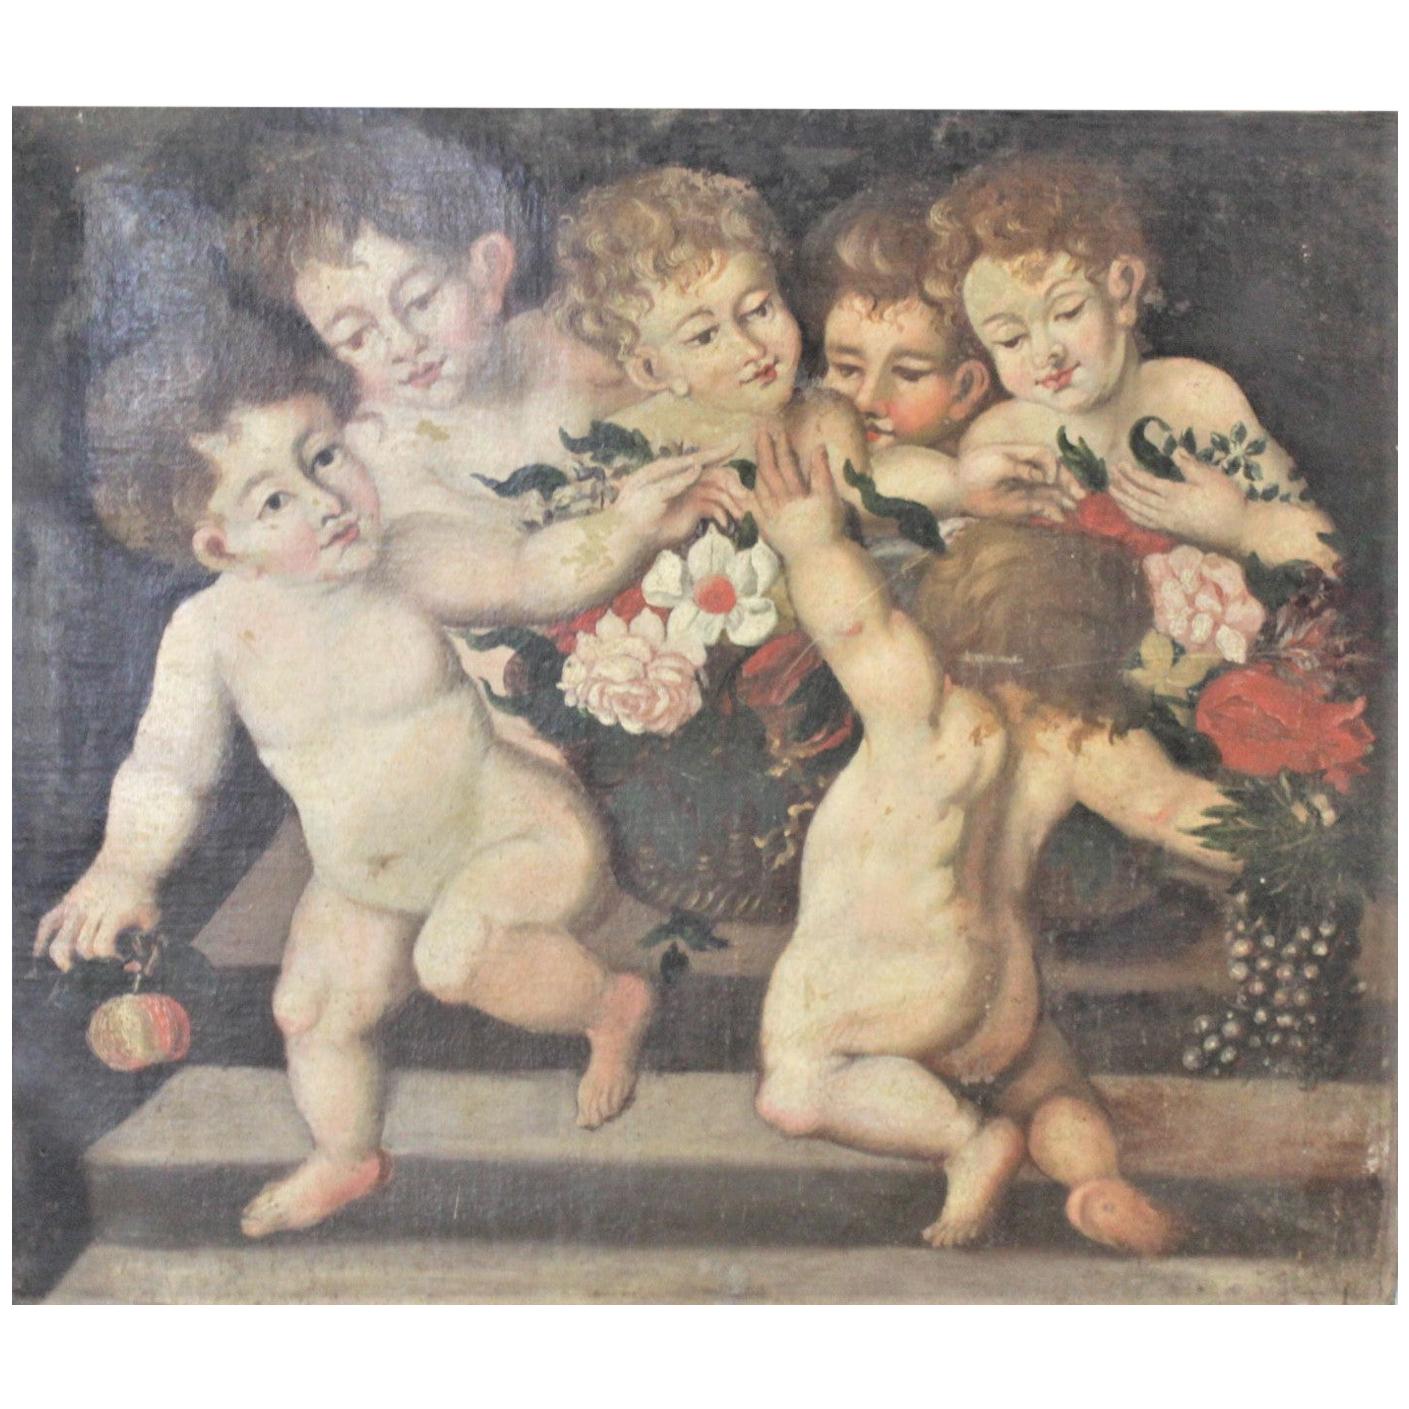 Antique Unsigned Oil Painting on Canvas of Young Children Playing Together